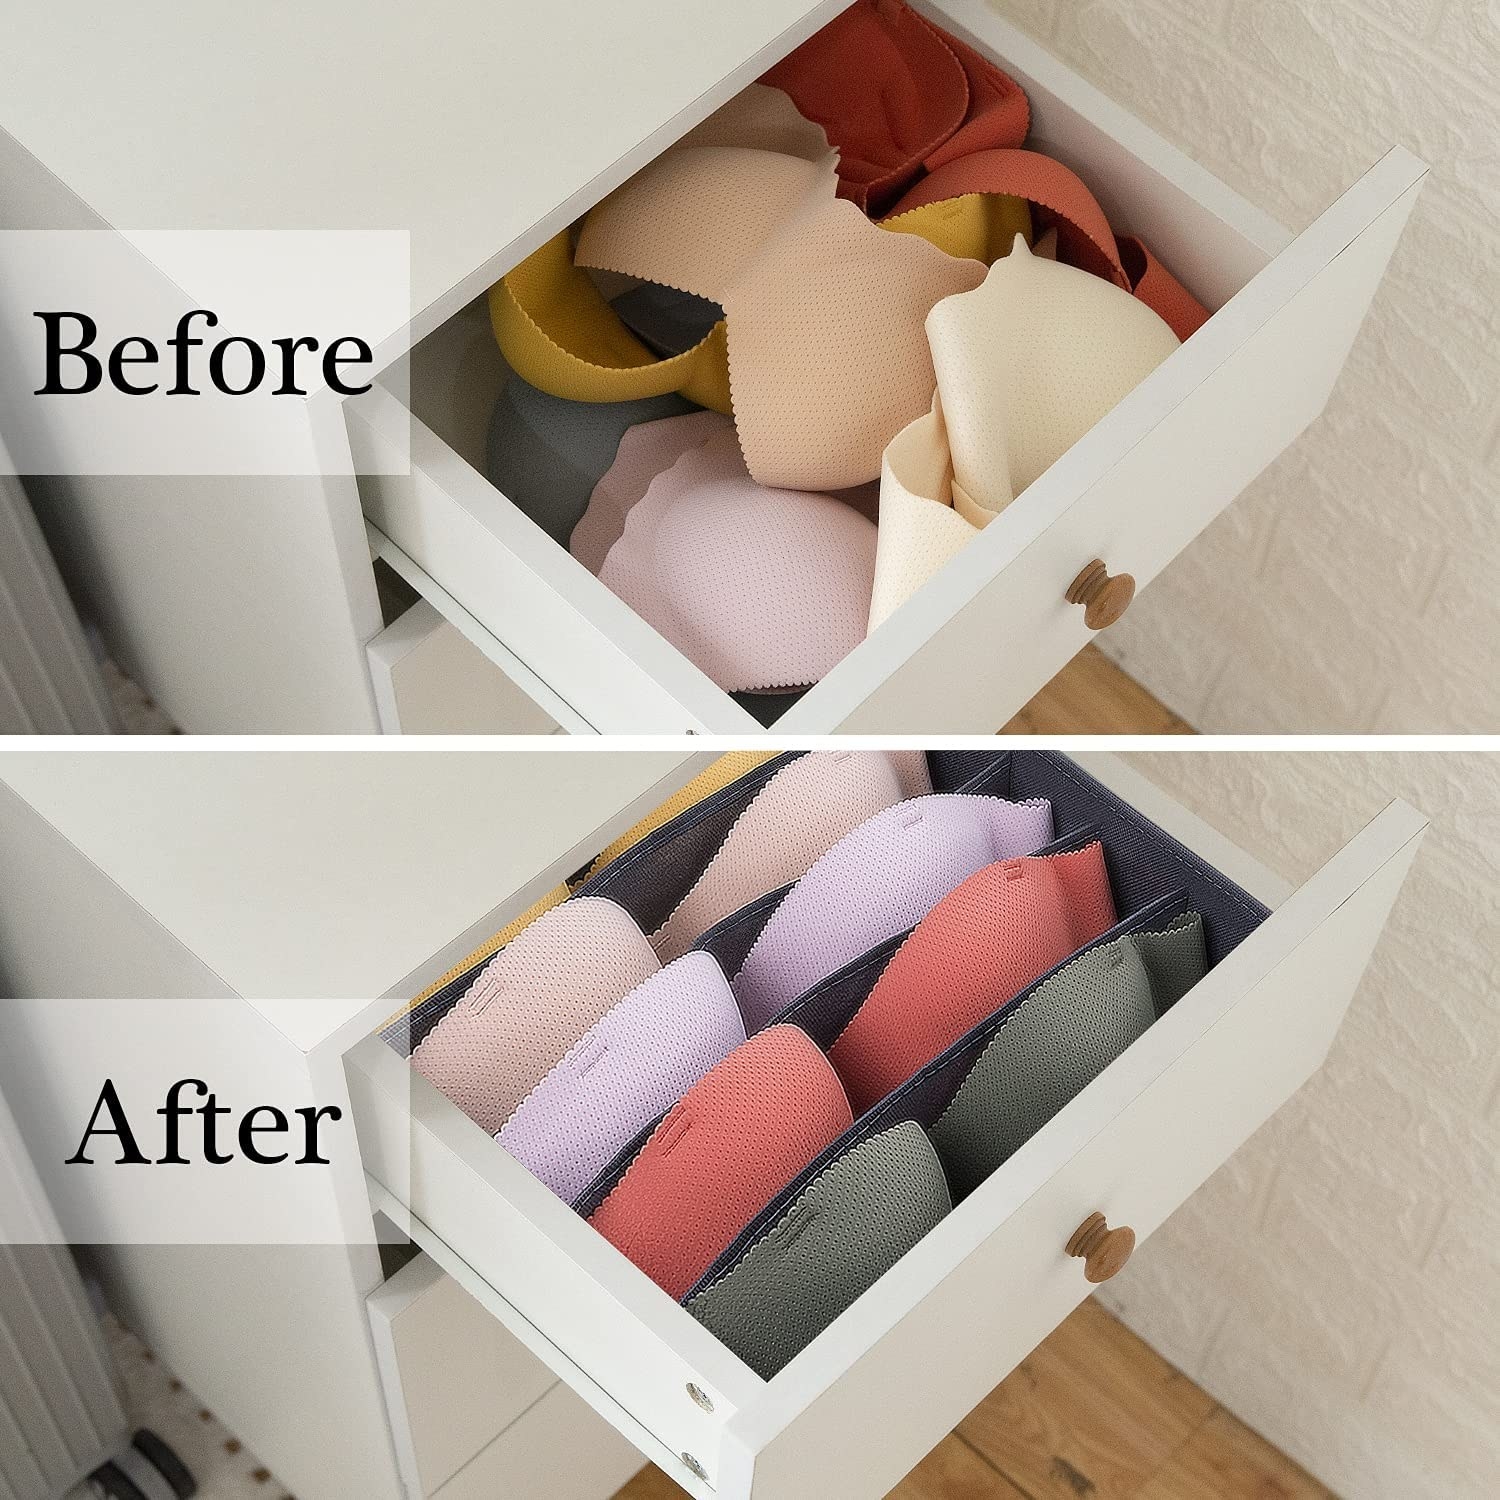 a before and after where the after shows neatly organized bras in a drawer